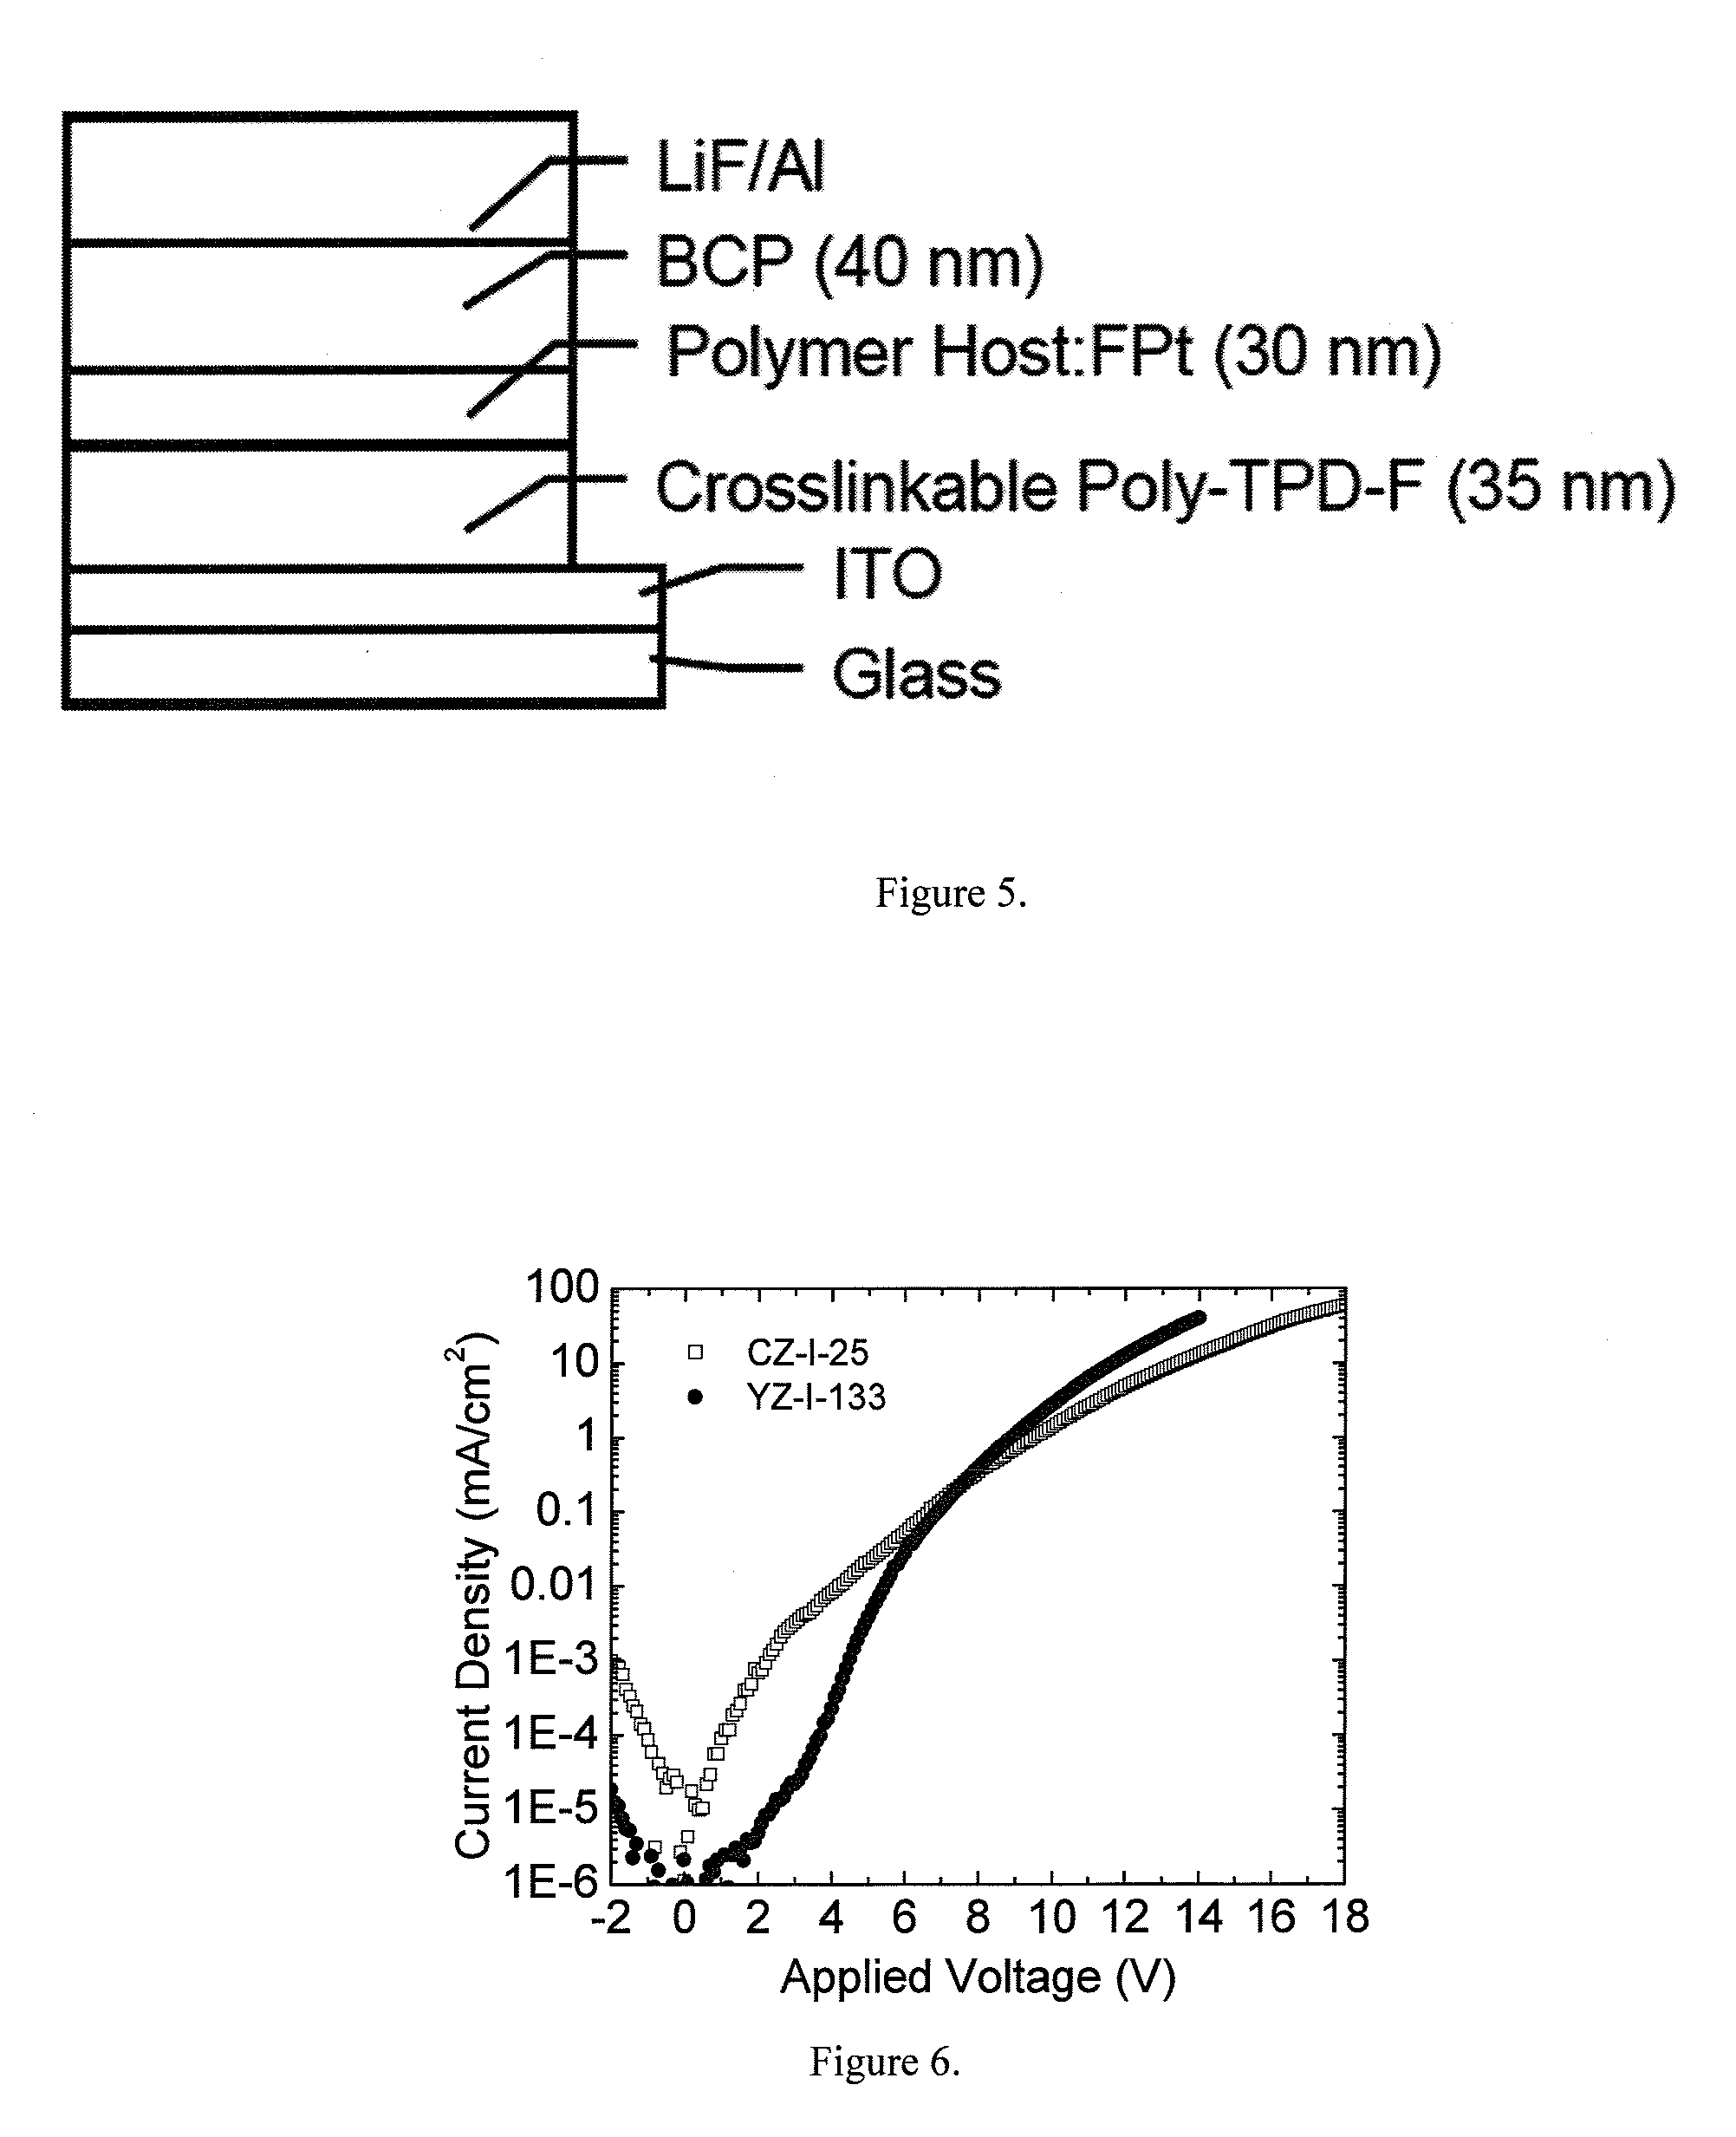 Carbazole-based hole transport and/or electron blocking materials and/or host polymer materials